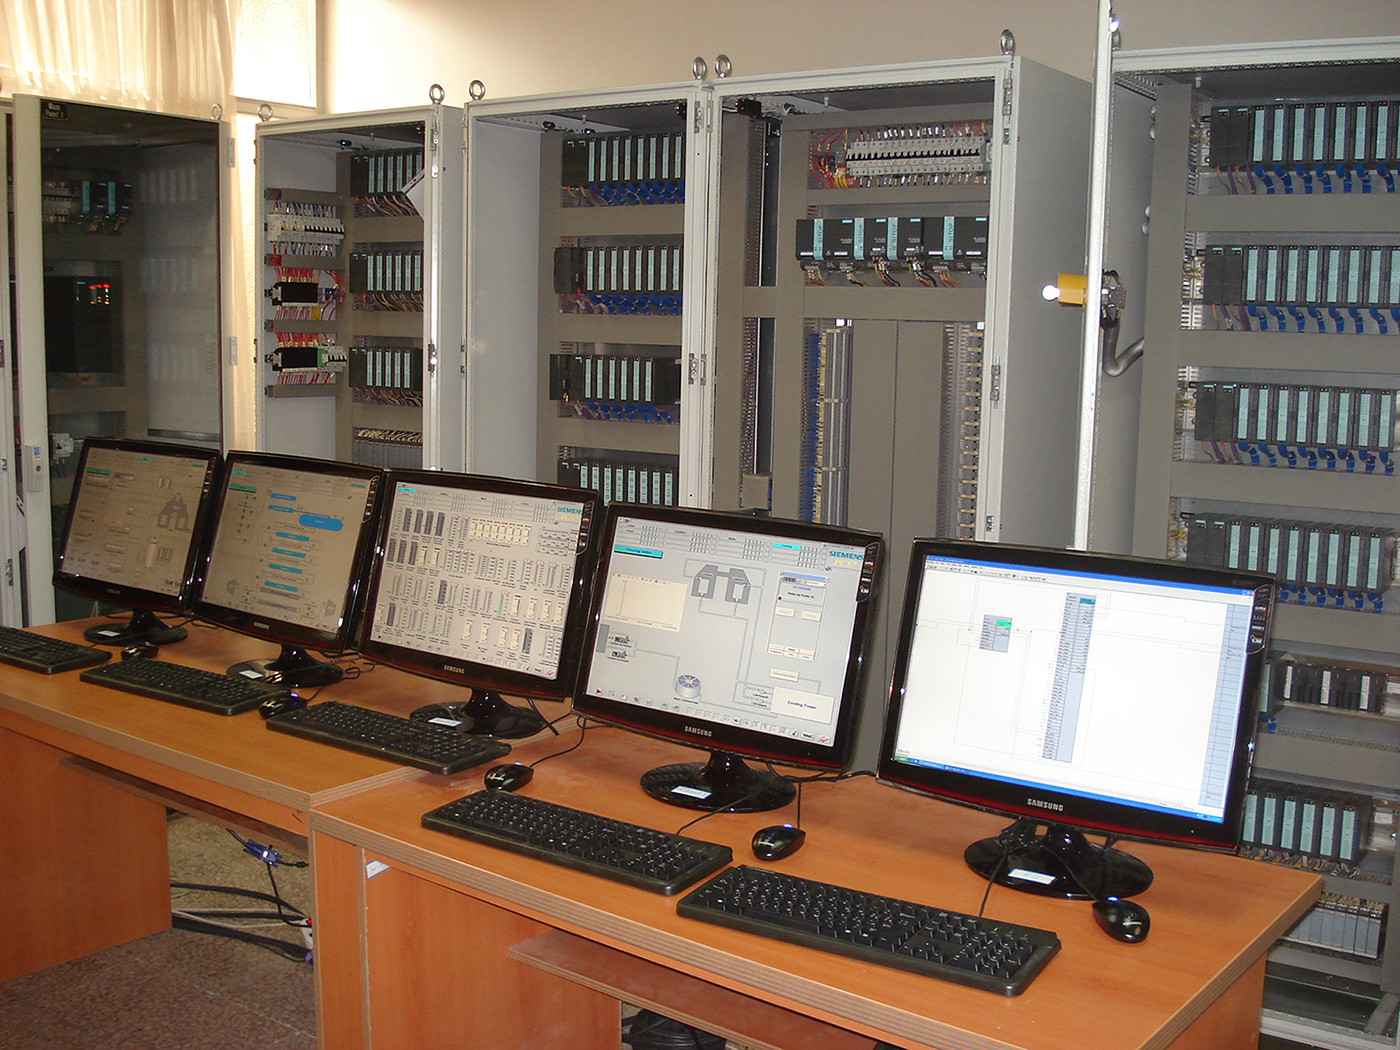 Upgrading hardware, software and optimizing industrial automation systems